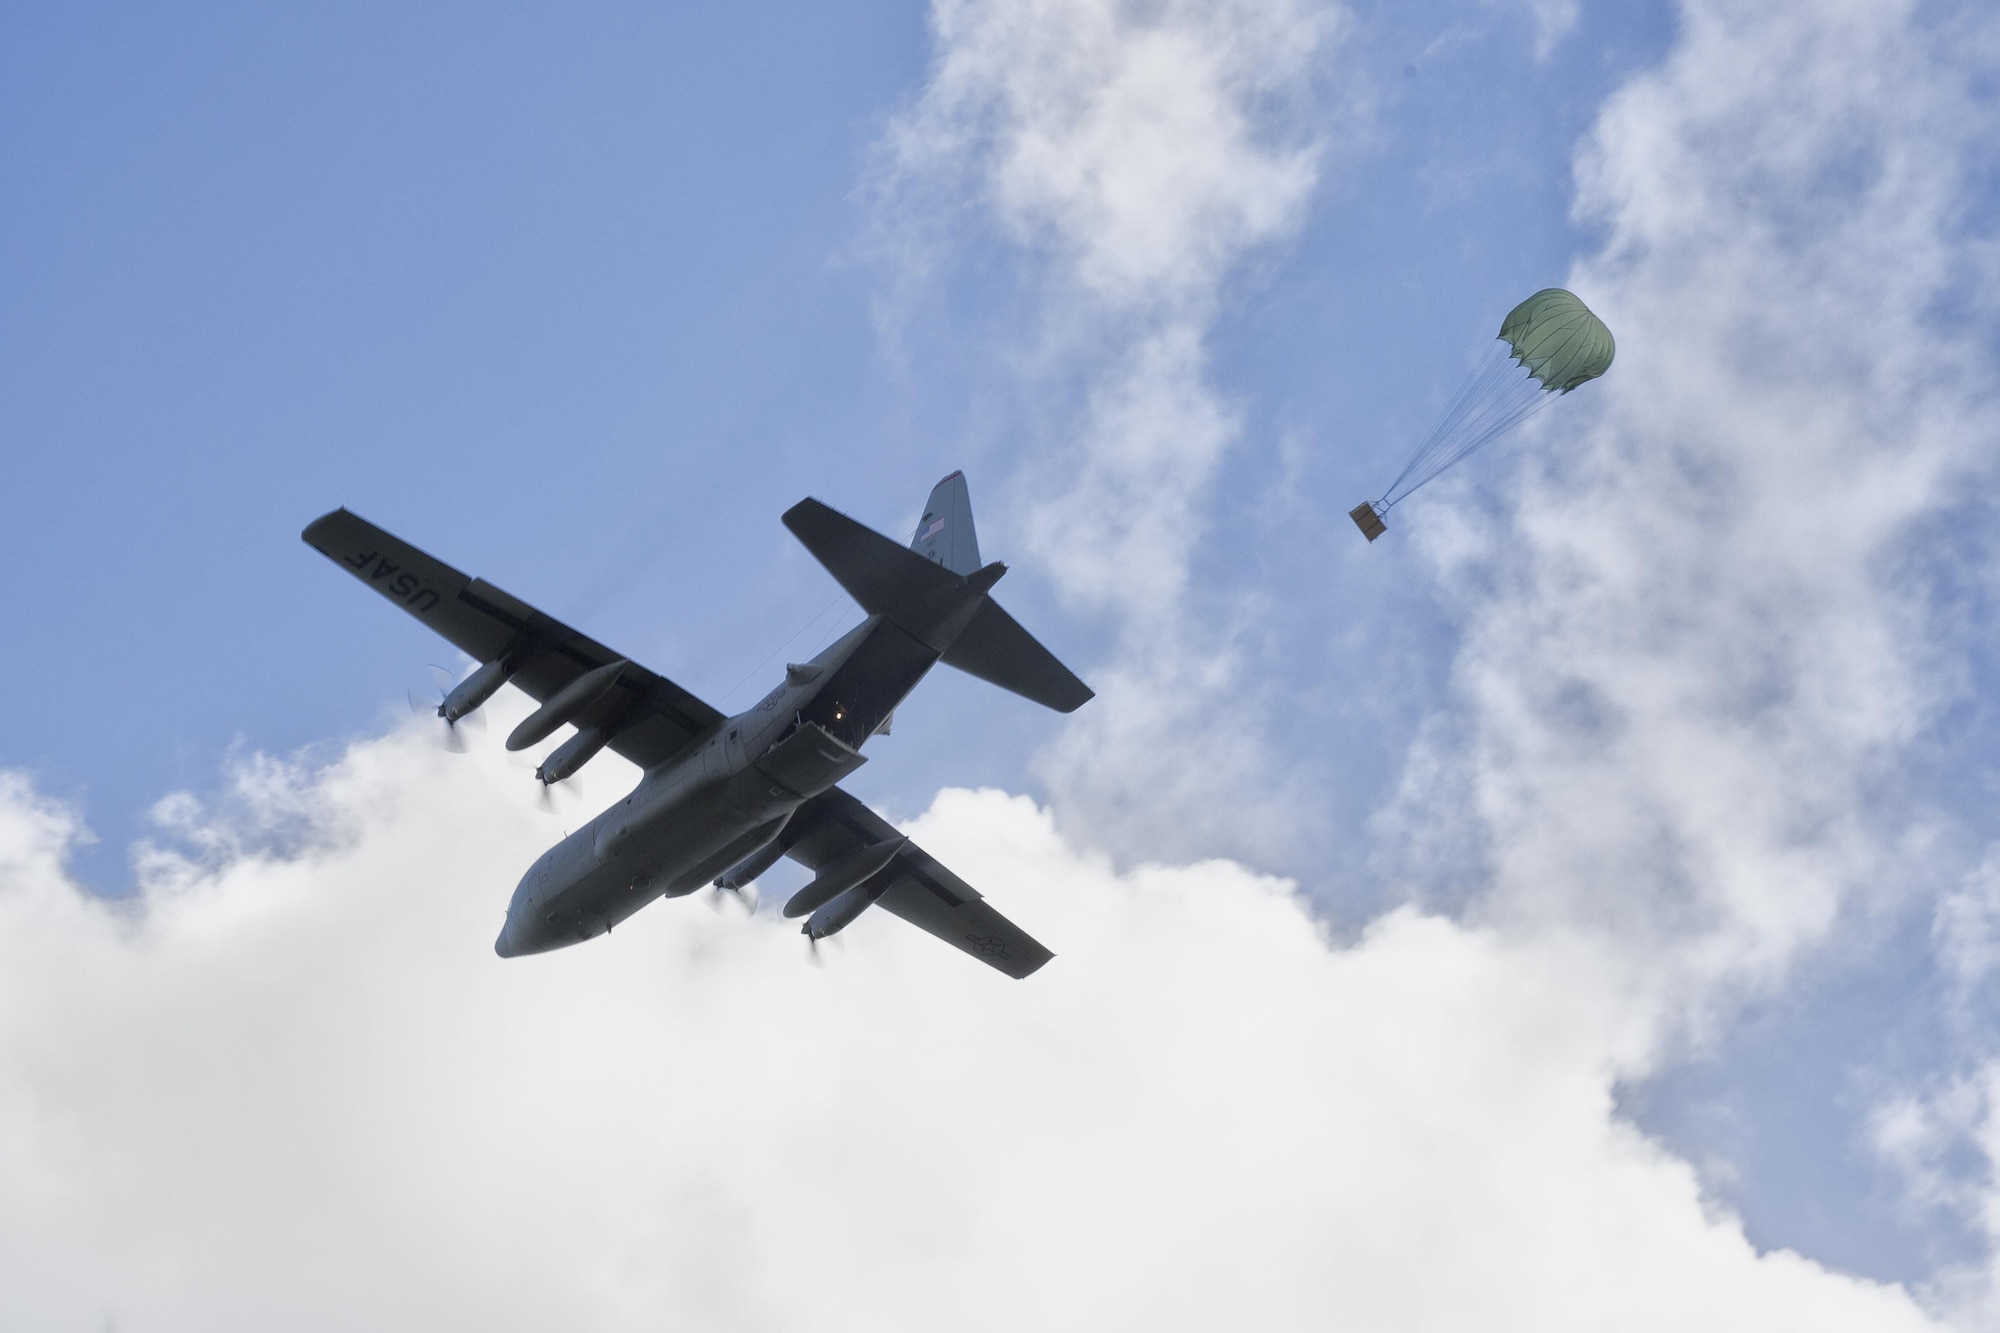 A C-130 Hercules assigned to the 36th Airlift Squadron drops a bundles during Operation Christmas Drop 2015, at Fais Island, Federated States of Micronesia, Dec. 8, 2015. Airmen delivered over 800 pounds of supplies to the island of Fais during Operation Christmas Drop 2015. This year marks the first trilateral Operation Christmas Drop where the U.S. Air Force, Japan Air Self-Defense Force and the Royal Australian Air Force work together to provide critical supplies to 56 Micronesian islands. (U.S. Air Force photo by Osakabe Yasuo/Released)